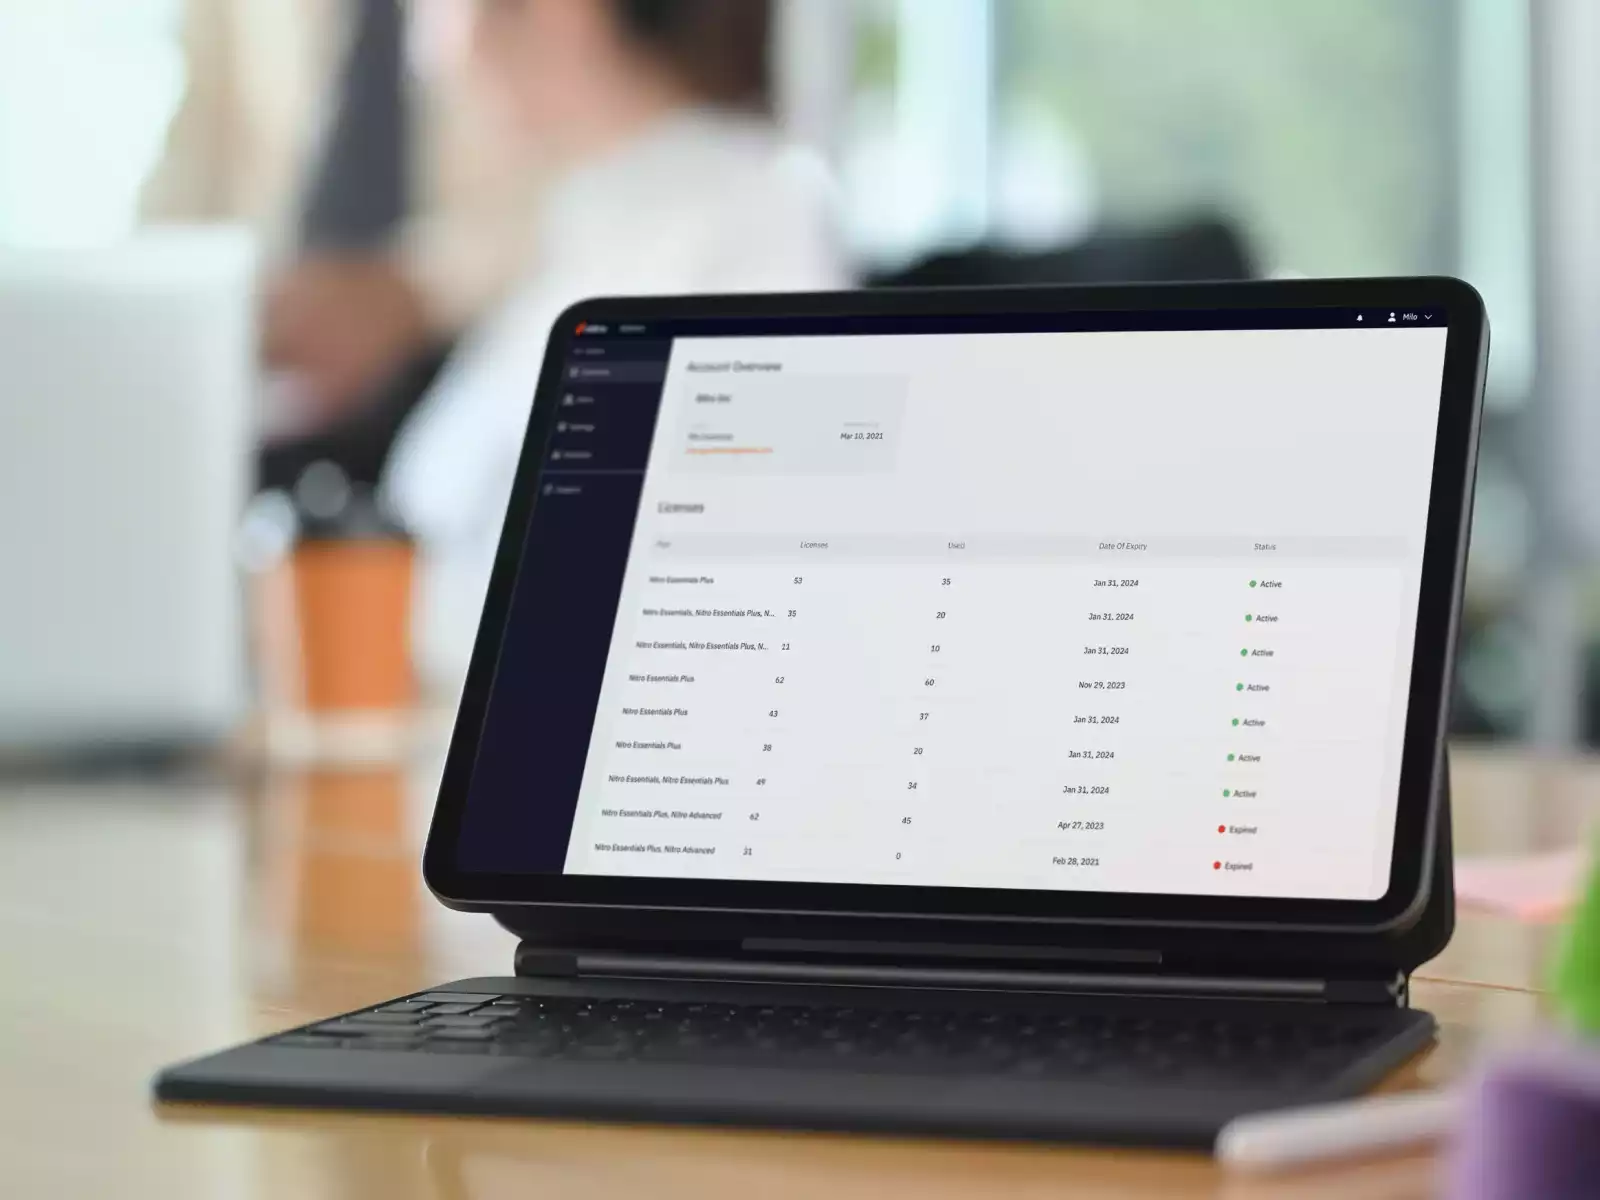 IT Teams: Save Time on Tasks With the Nitro Admin Portal